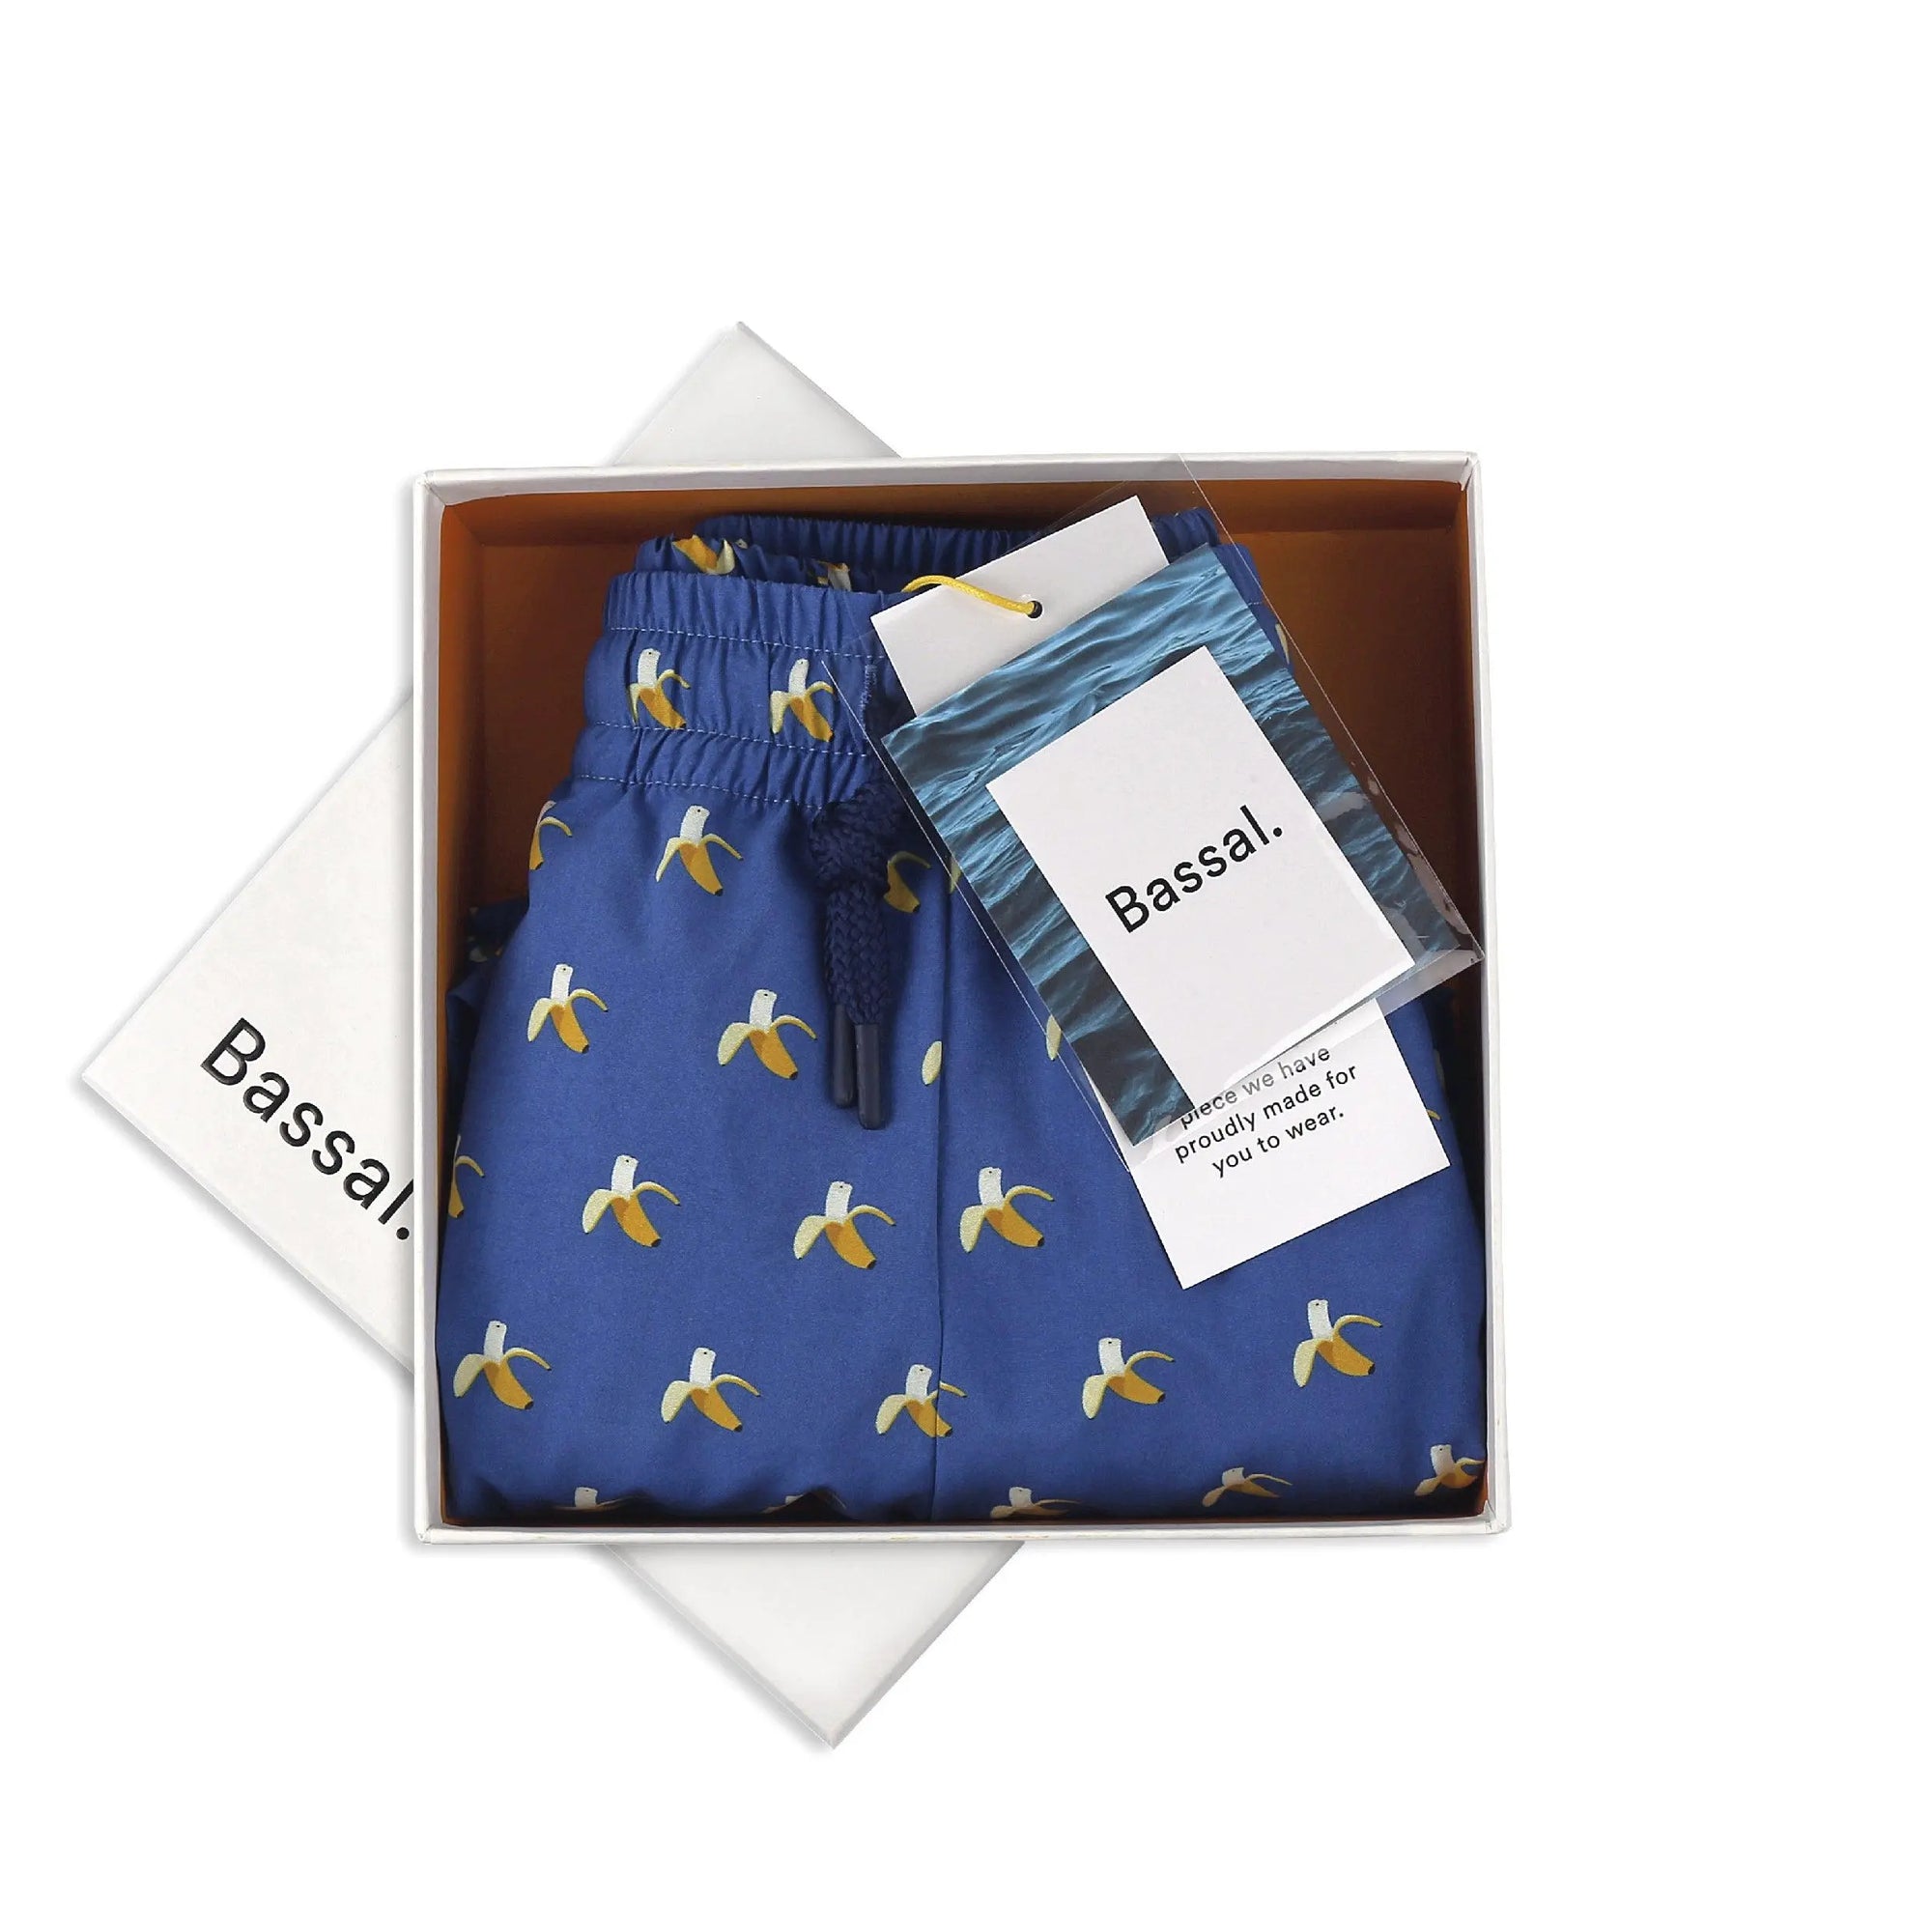 A pair of blue shorts with a banana pattern, neatly folded in a white box. The box lid, partially visible, has "Bassal." written on it. Also inside the box are two labeled packets, one possibly containing a product tag and the other in blue packaging. This delightful item, Bananas Swimwear by Bassal., is available at Bassalstore in Barcelona.